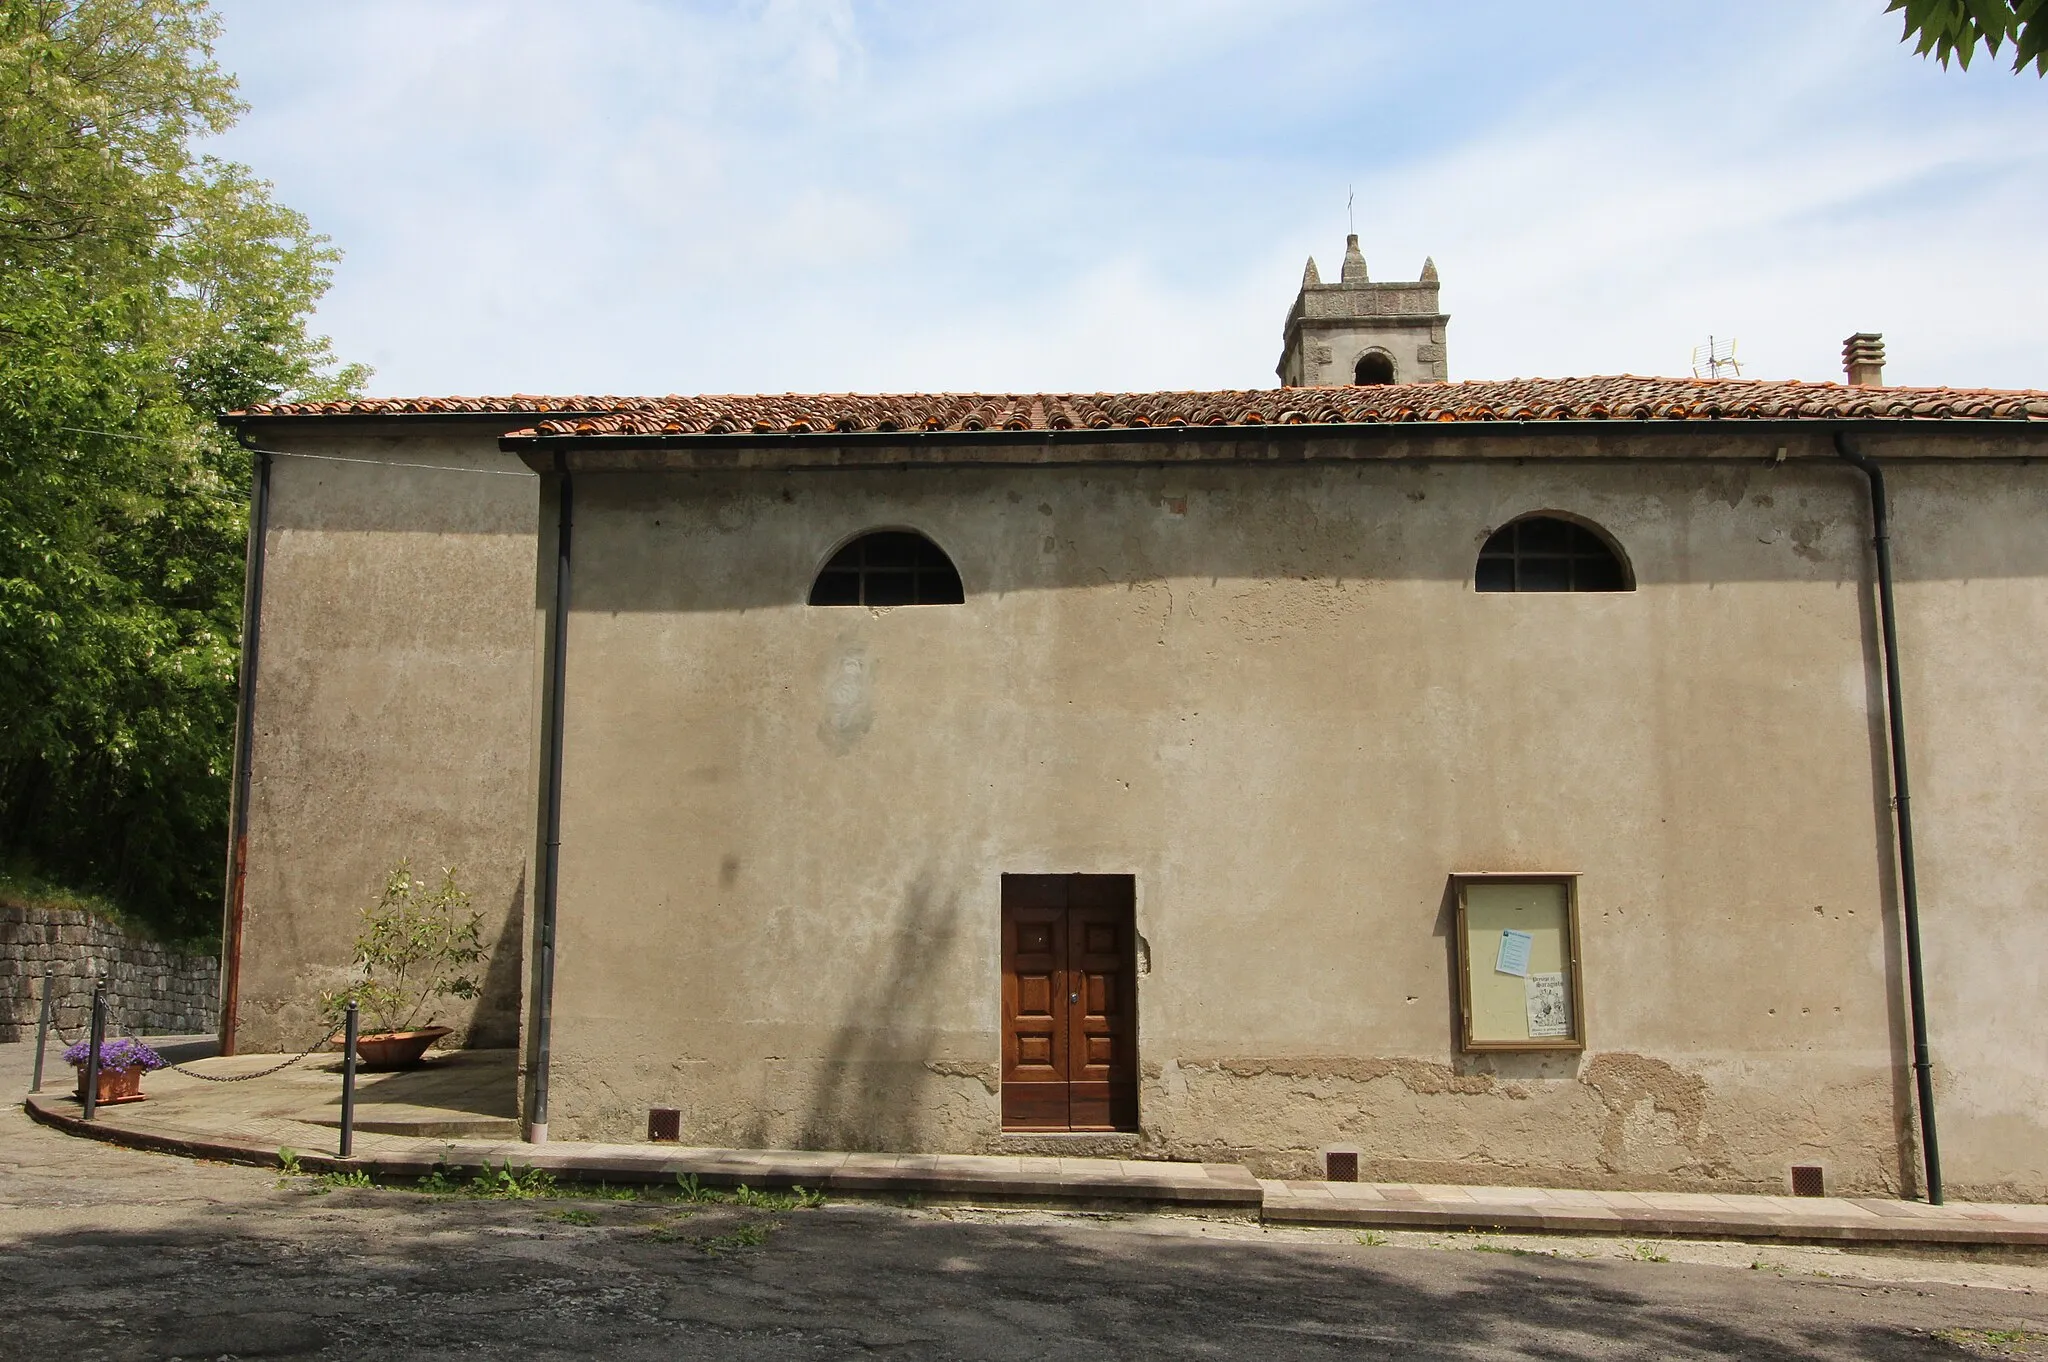 Photo showing: Church Chiesa del Crocifisso, Tre Case, village in the territory of Piancastagnaio, Province of Siena, Tuscany, Italy.